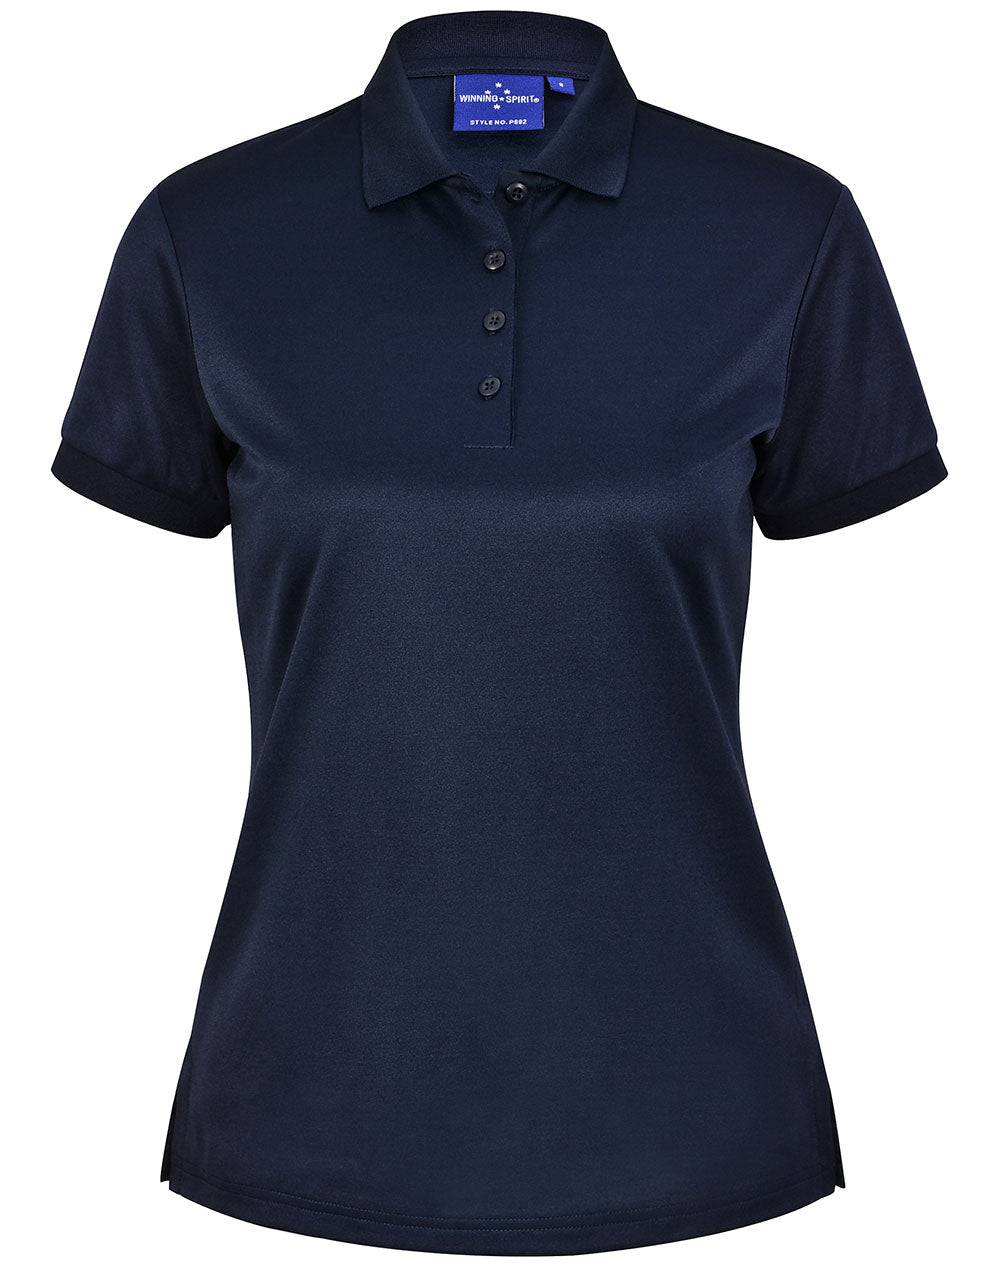 Winning Spirit Ladie's Sustainable Poly/Cotton Corporate Polo PS92